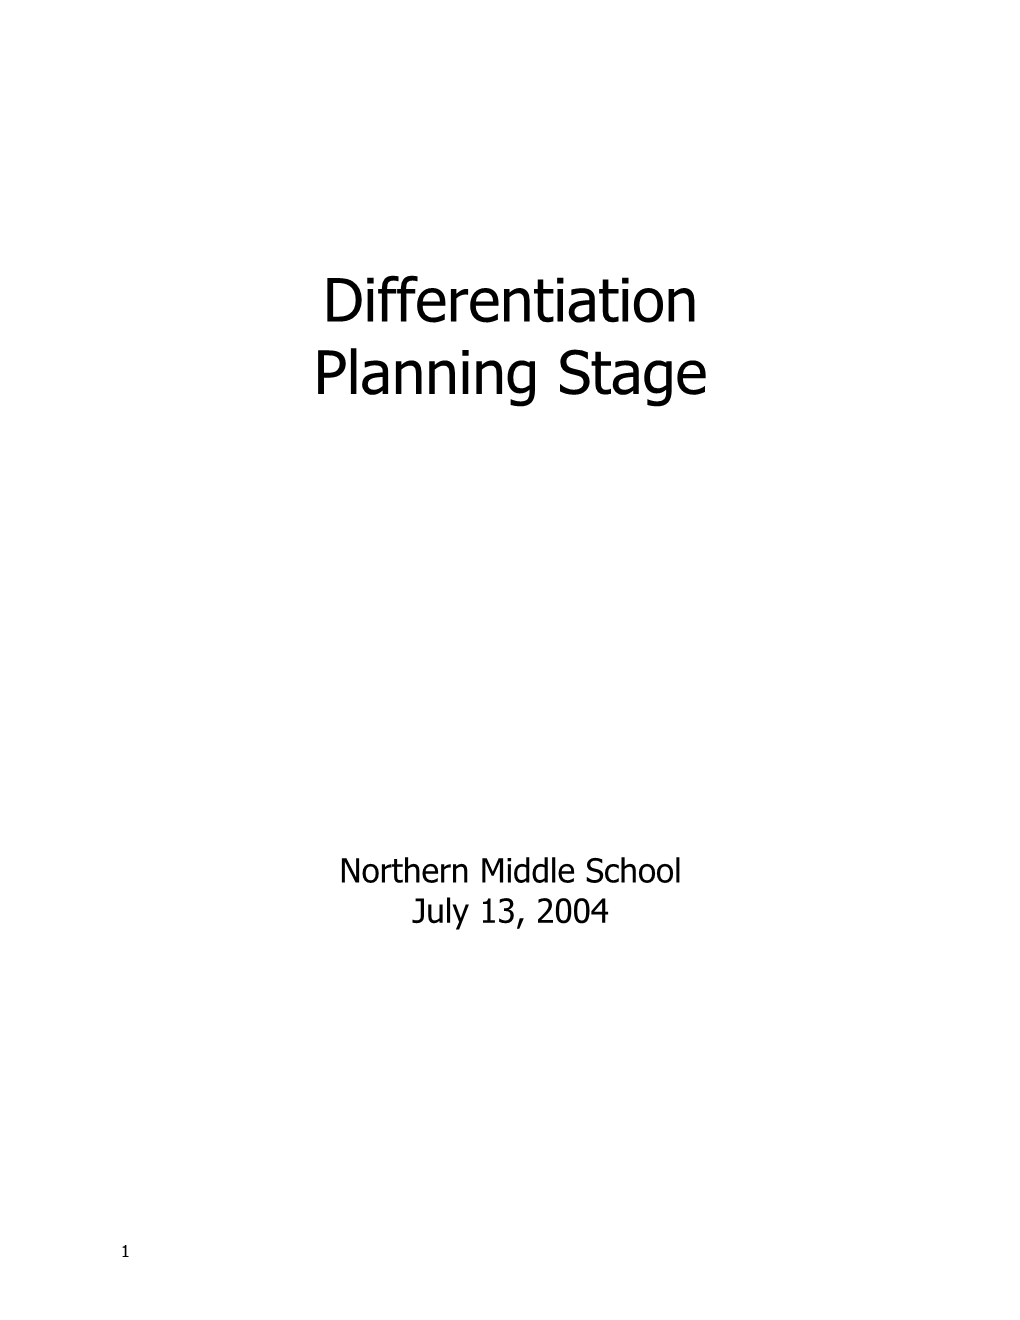 Three Phases of Planning Instruction